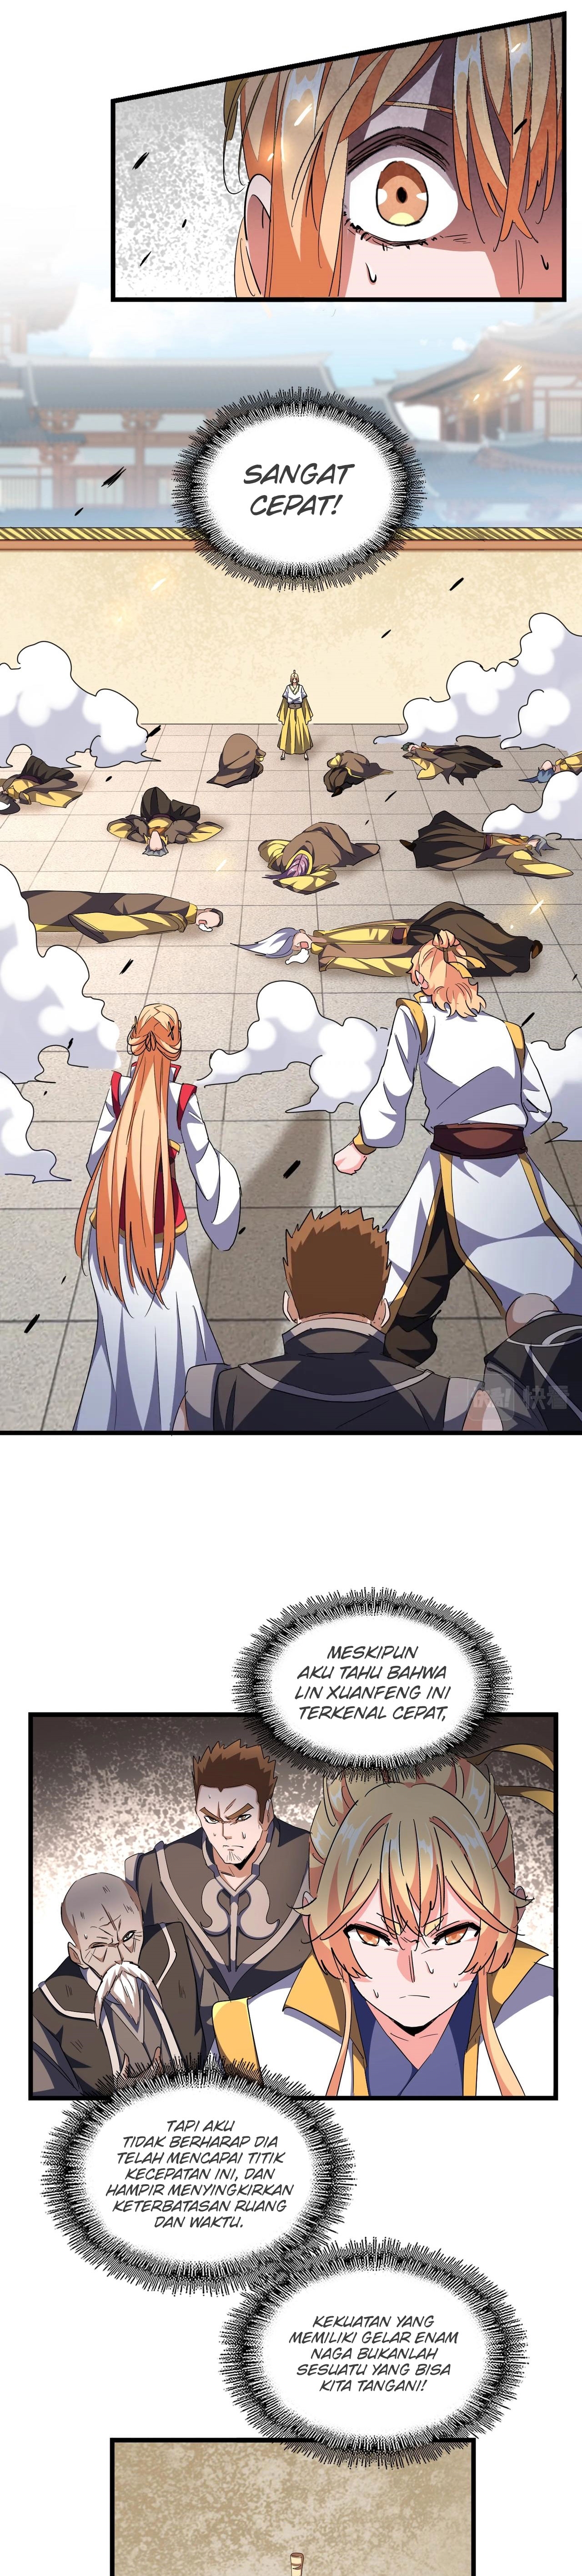 Magic Emperor Chapter 293 Image 2